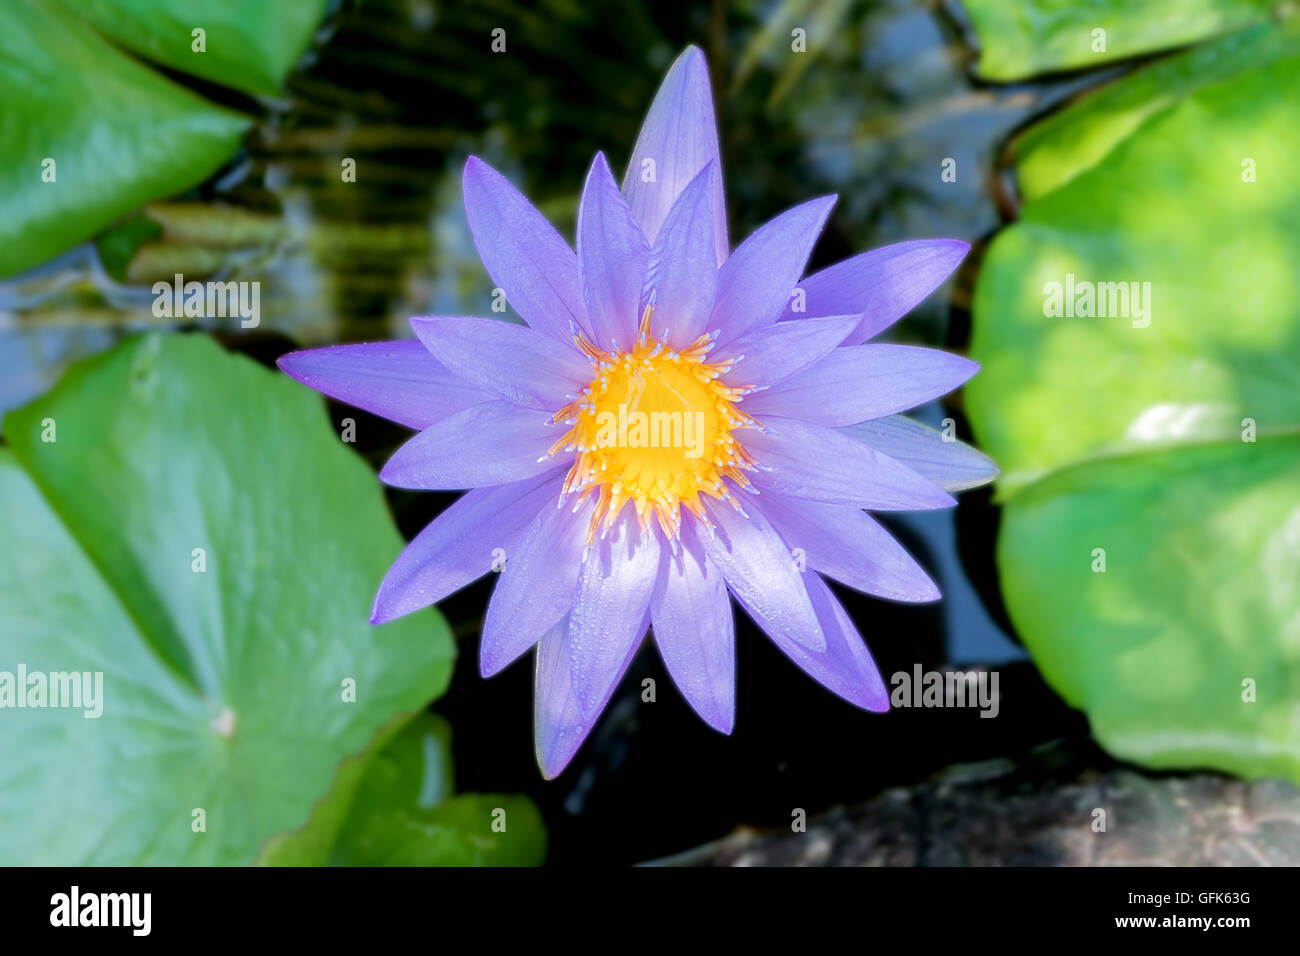 Lotus flower in purple violet color with green leaves in nature water pond close up Stock Photo